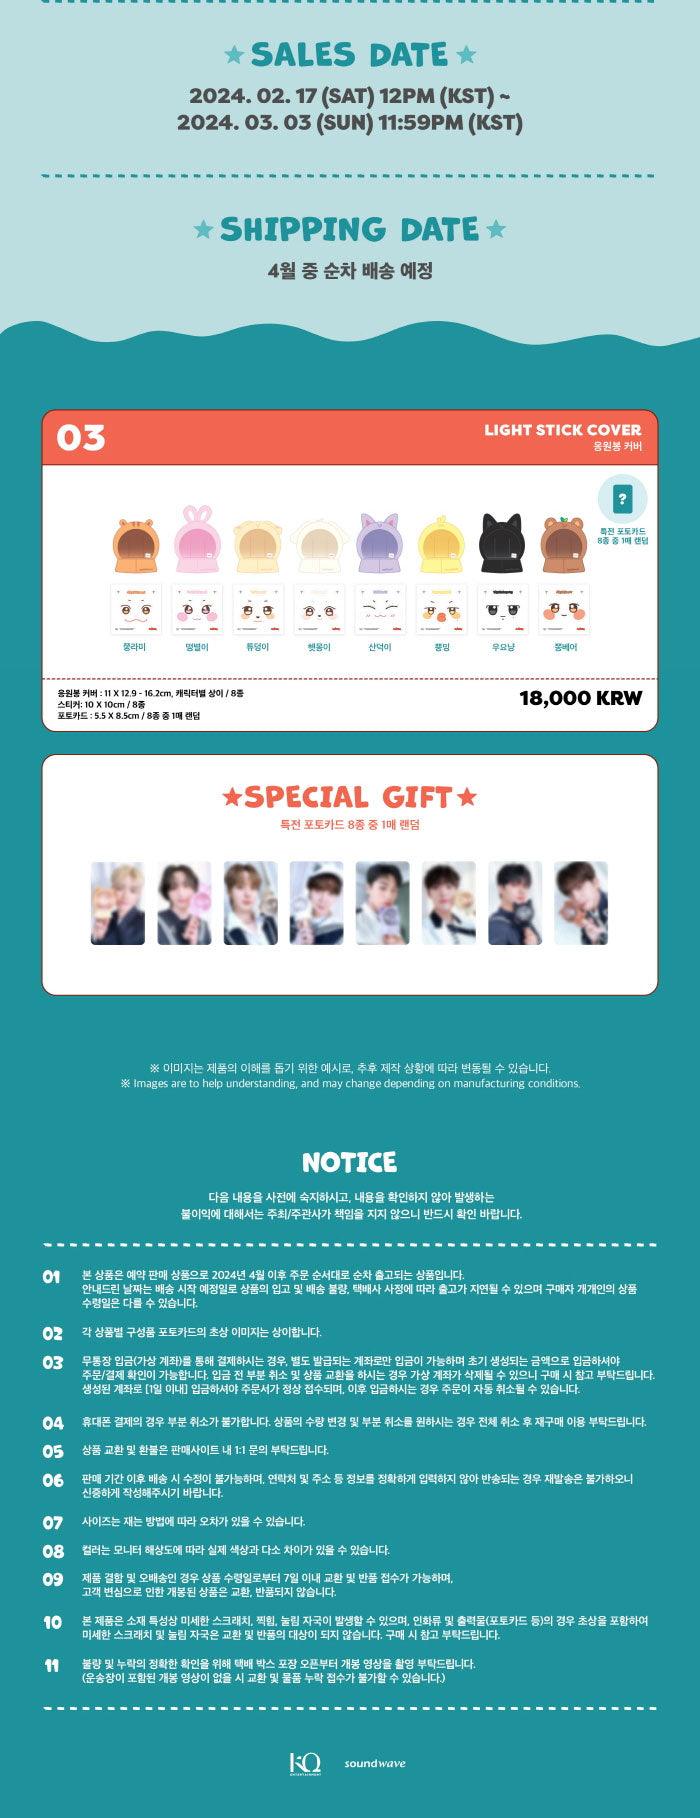 [PRE ORDER] ATEEZ -ANITEEZ IN ILLUSION - (Official MD) : LIGHTSTICK COVER - KAEPJJANG SHOP (캡짱 숍)